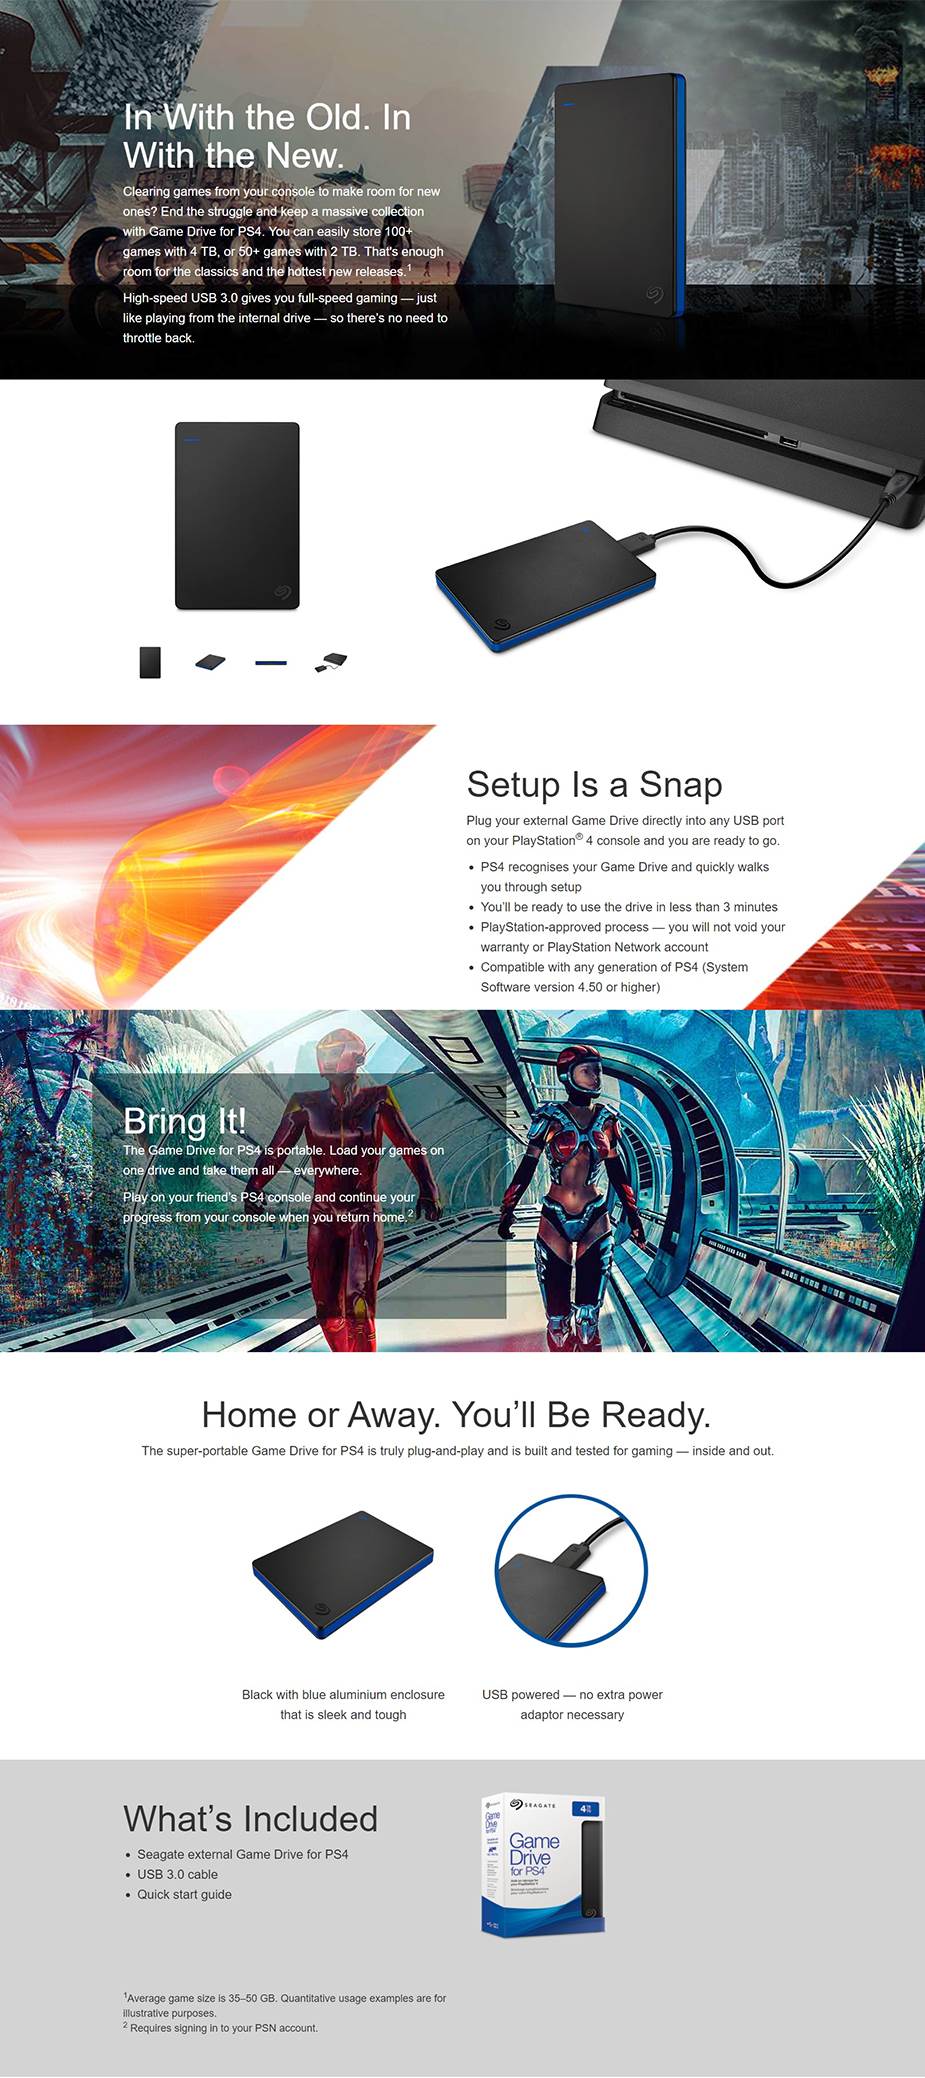 A large marketing image providing additional information about the product Seagate Game Drive for PS4 4TB - Additional alt info not provided